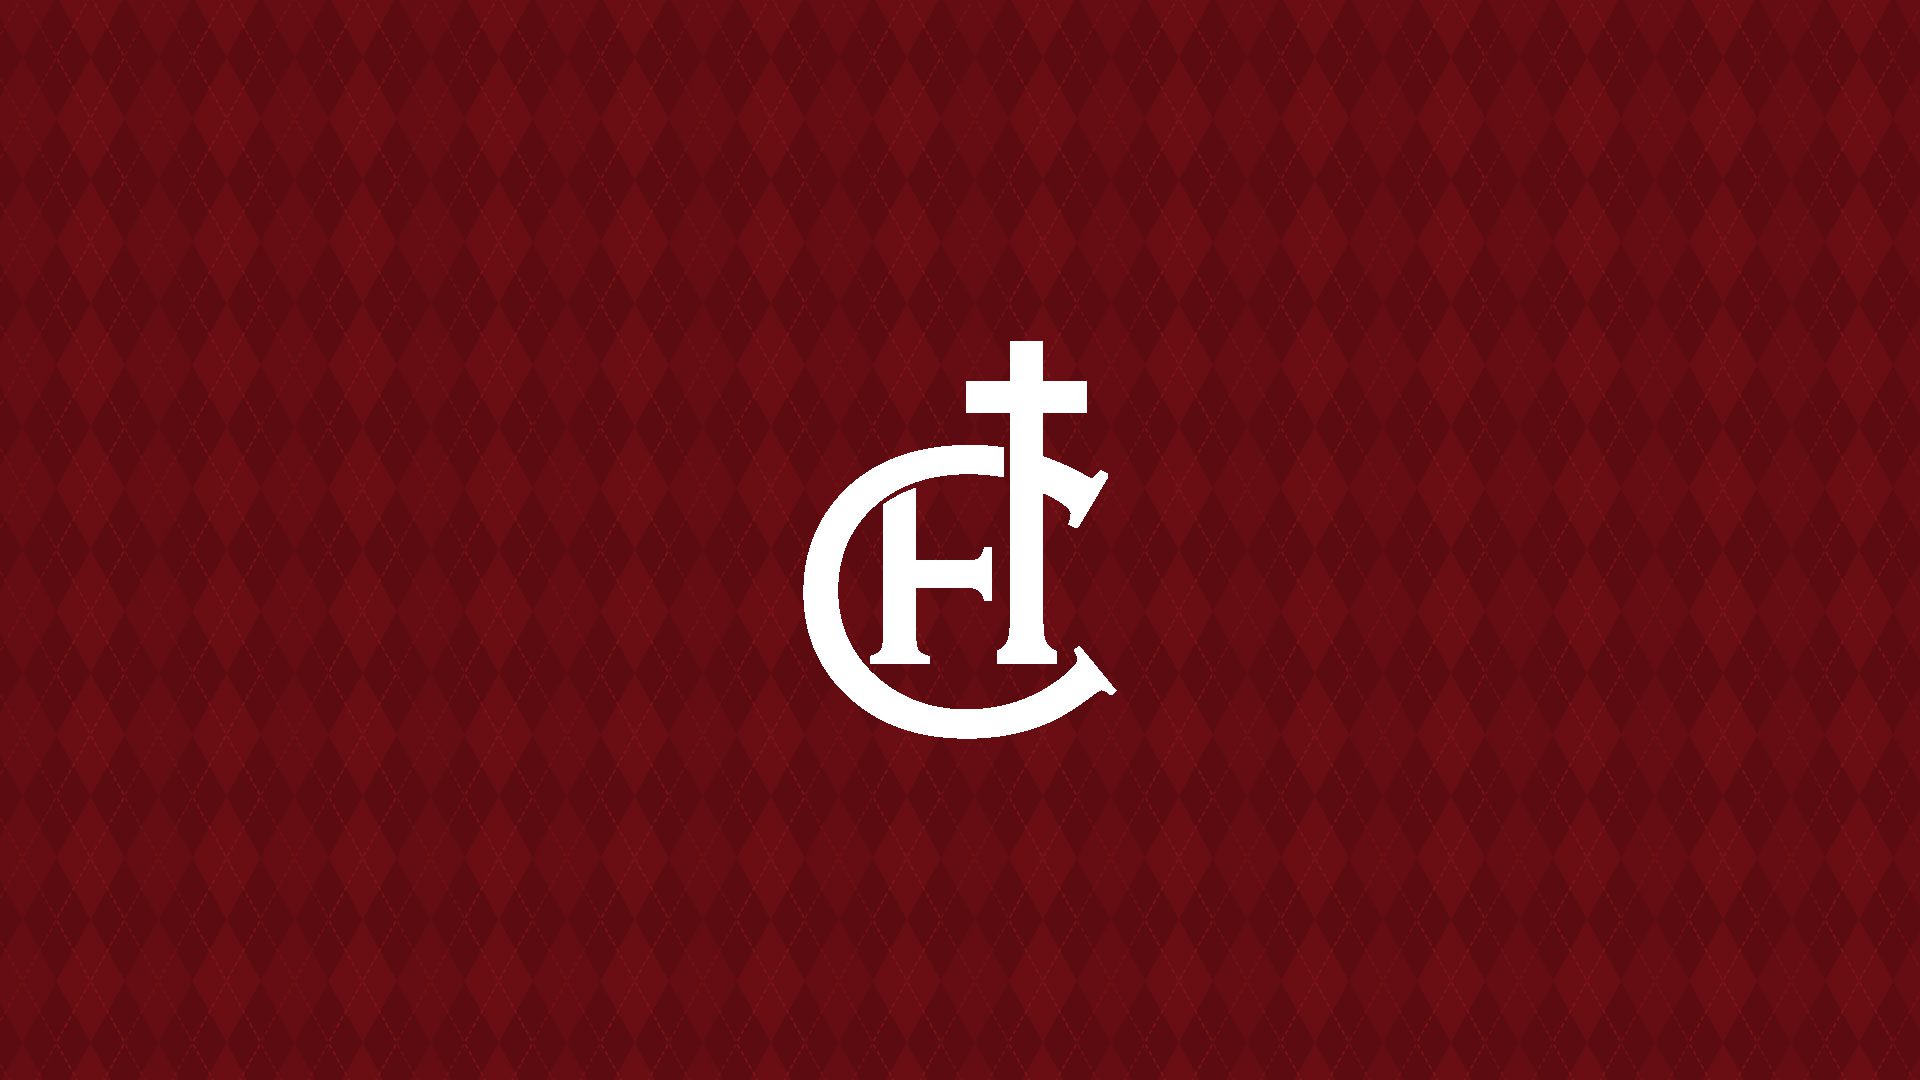 A red background with the letters ct and cross.